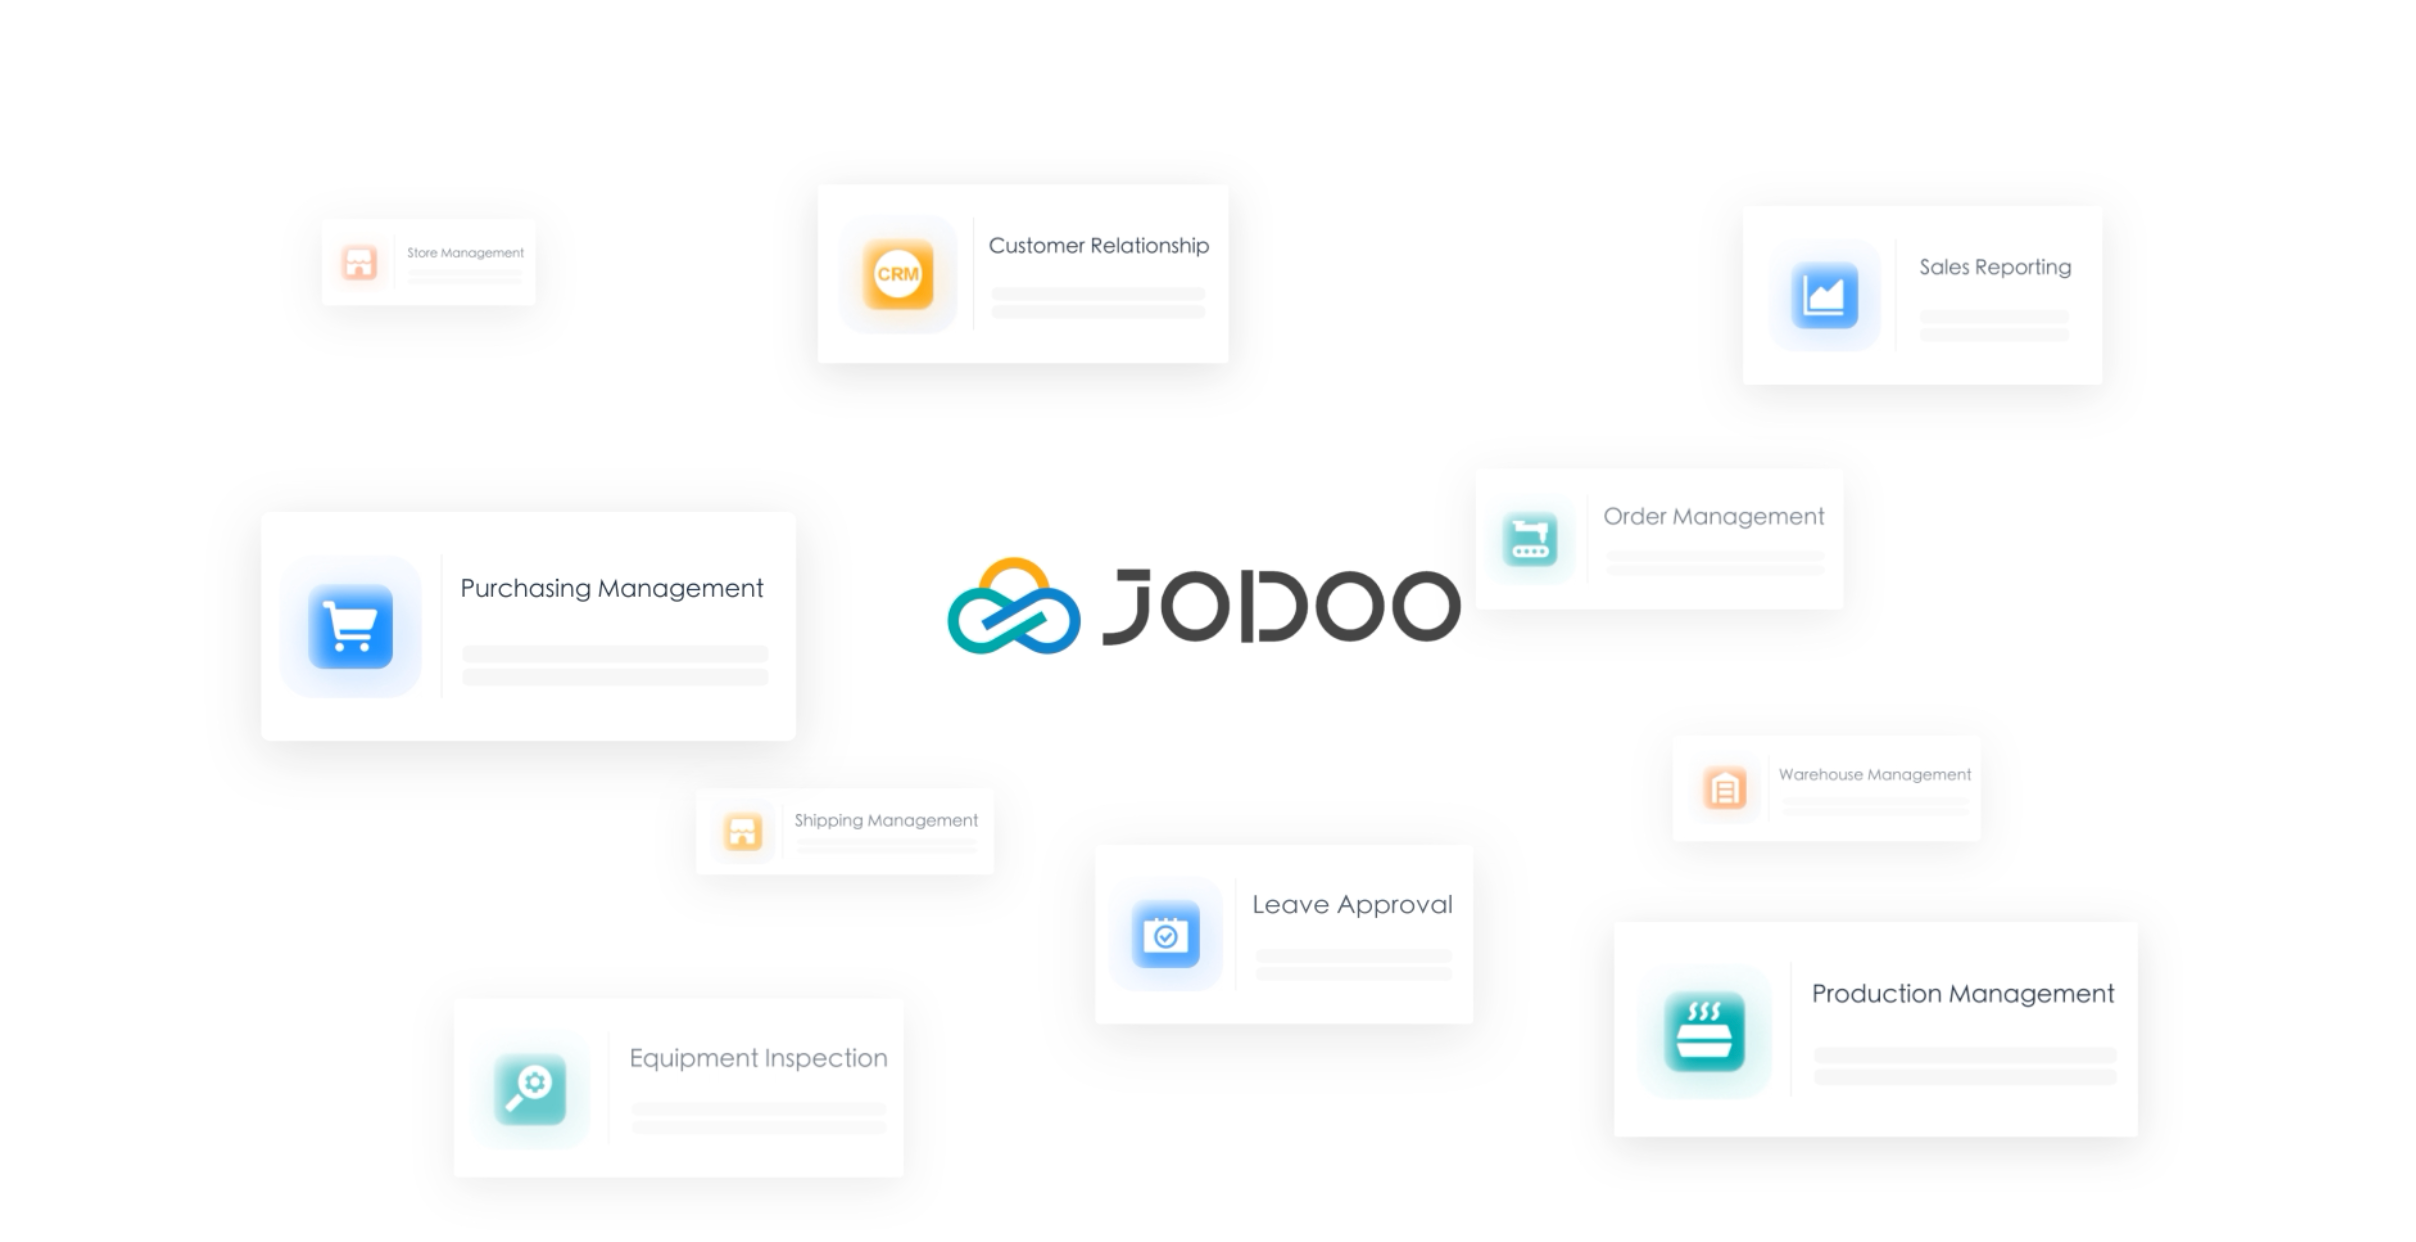 Build Your Enterprise Management System in 5 Minutes: Jodoo Product Quick Demo